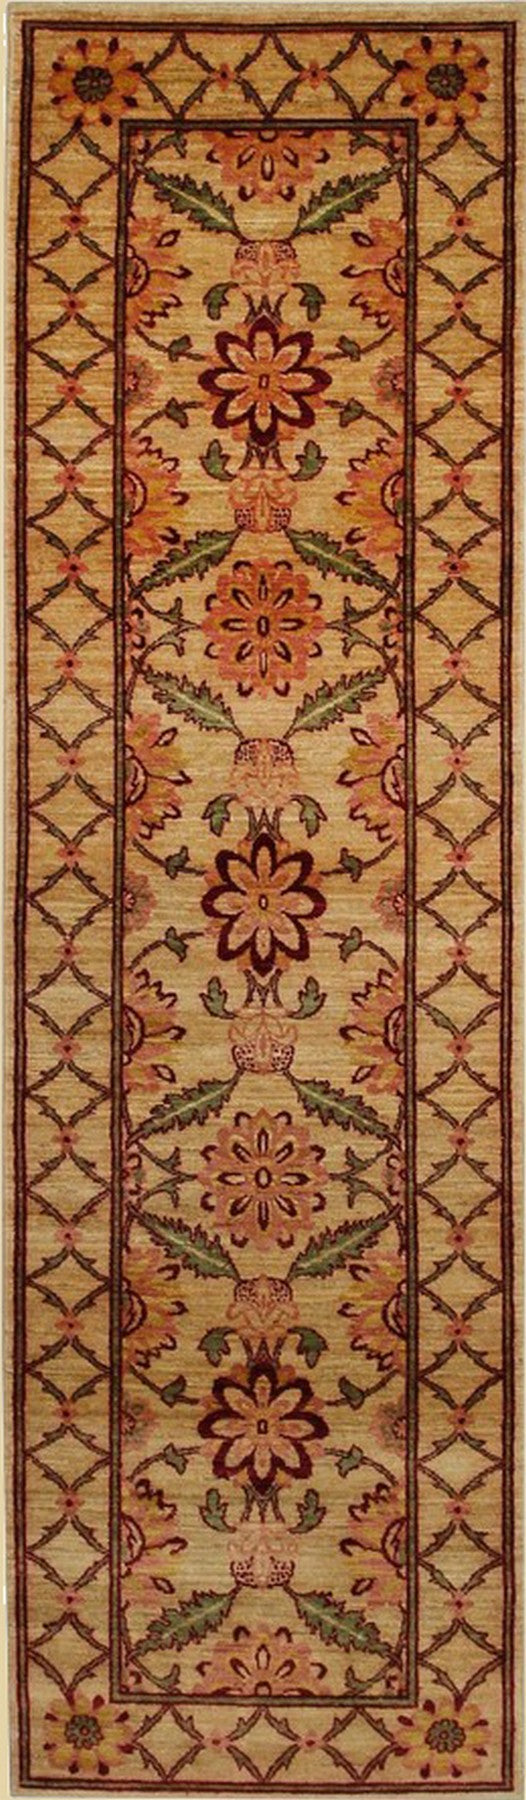 Handmade Afghan Wool Beige Transitional All Over Turkish Knot Rug, Made in India